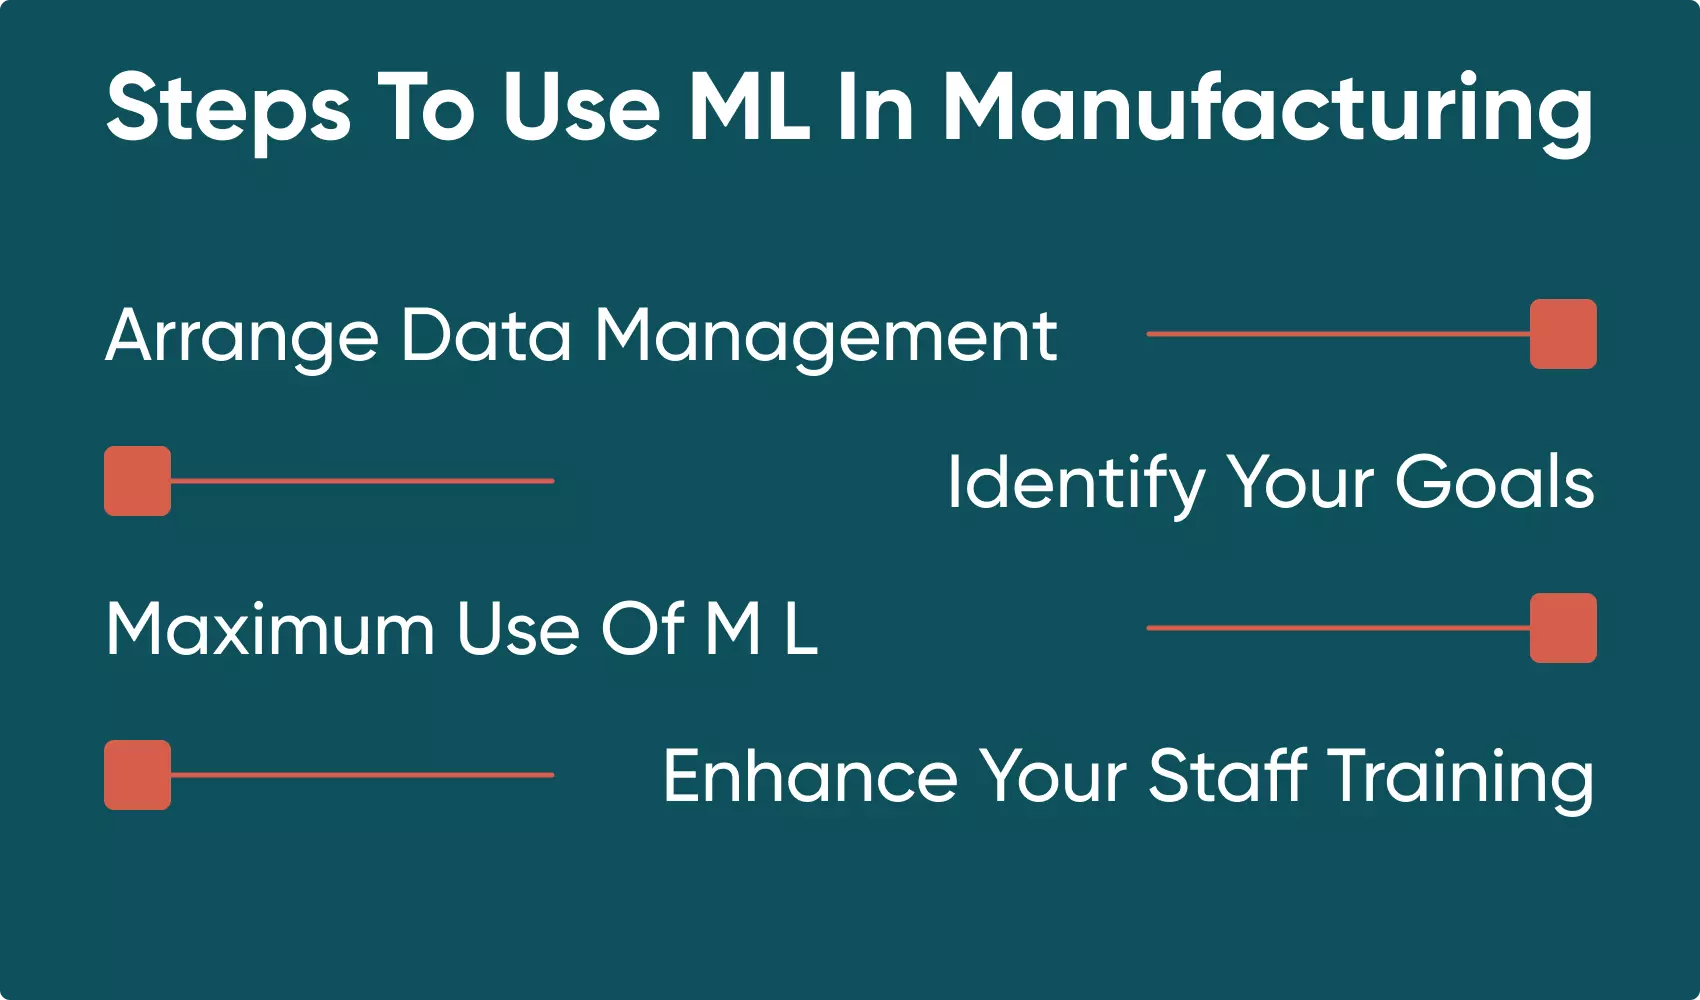 What steps to take when thinking of using Machine Learning in your manufacturing process.